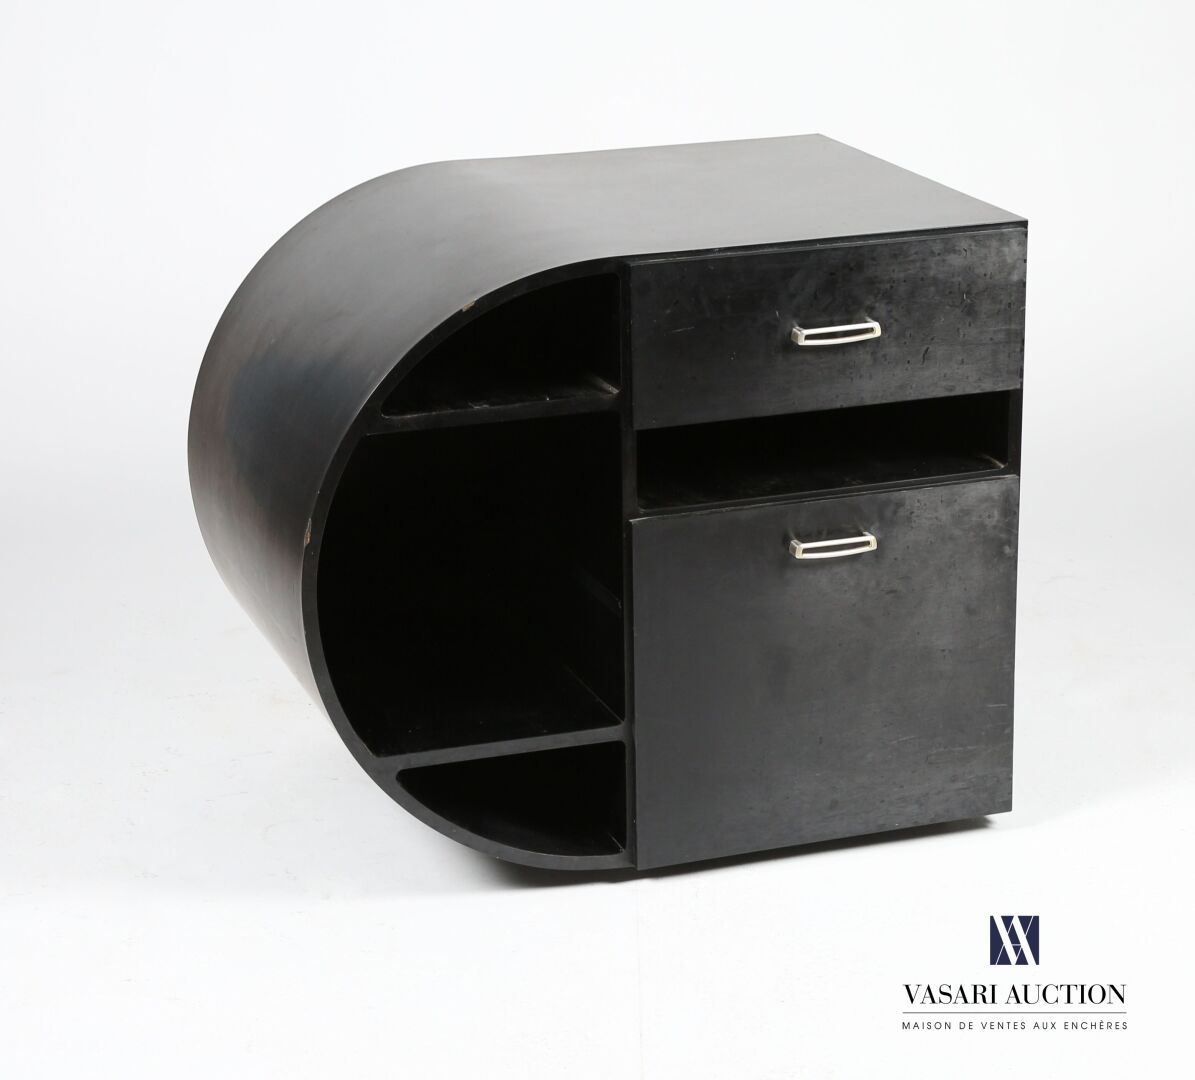 Null Storage unit in black melamine with a semi-spherical side with three shelve&hellip;